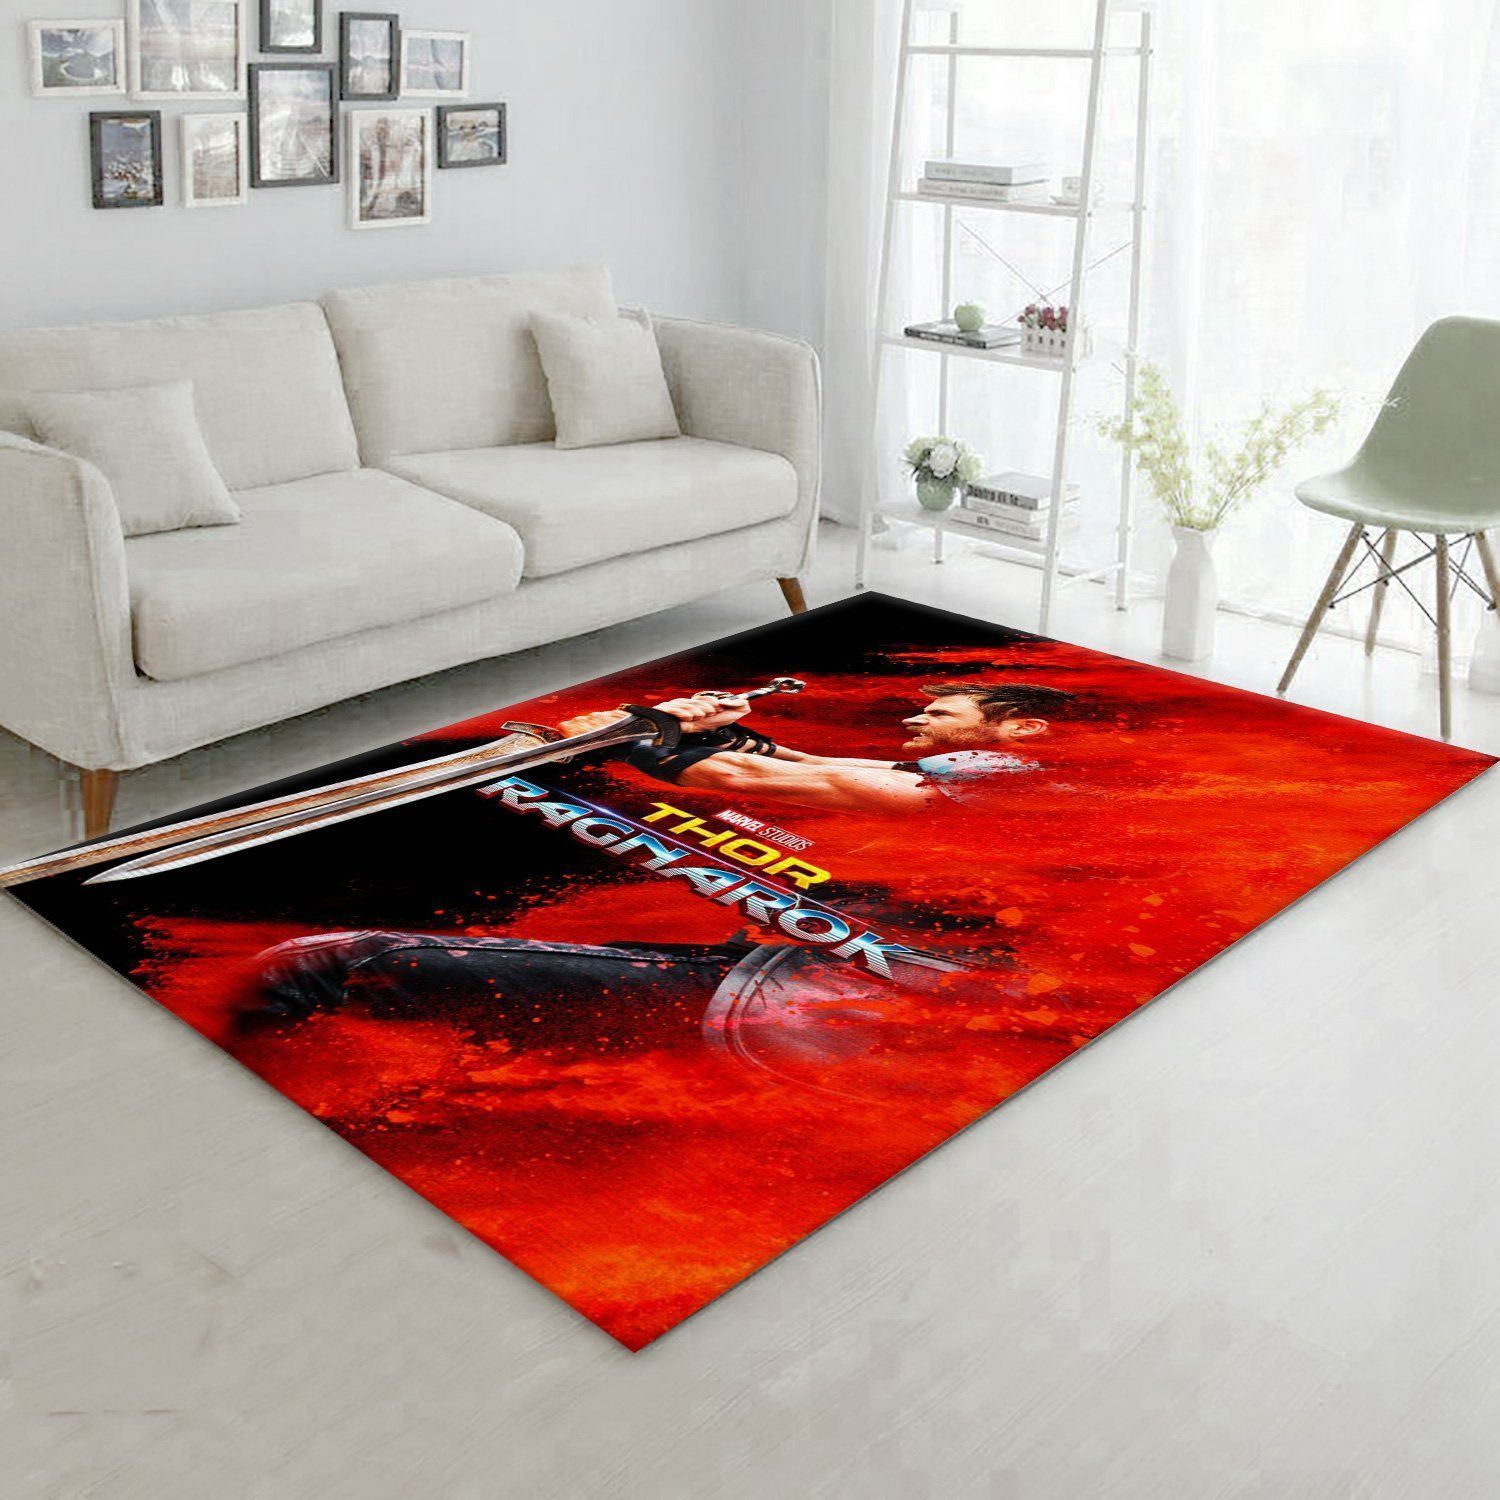 Thor Ragnarok Thor Area Rug For Christmas, Living Room Rug, Family Gift US Decor - Indoor Outdoor Rugs 2